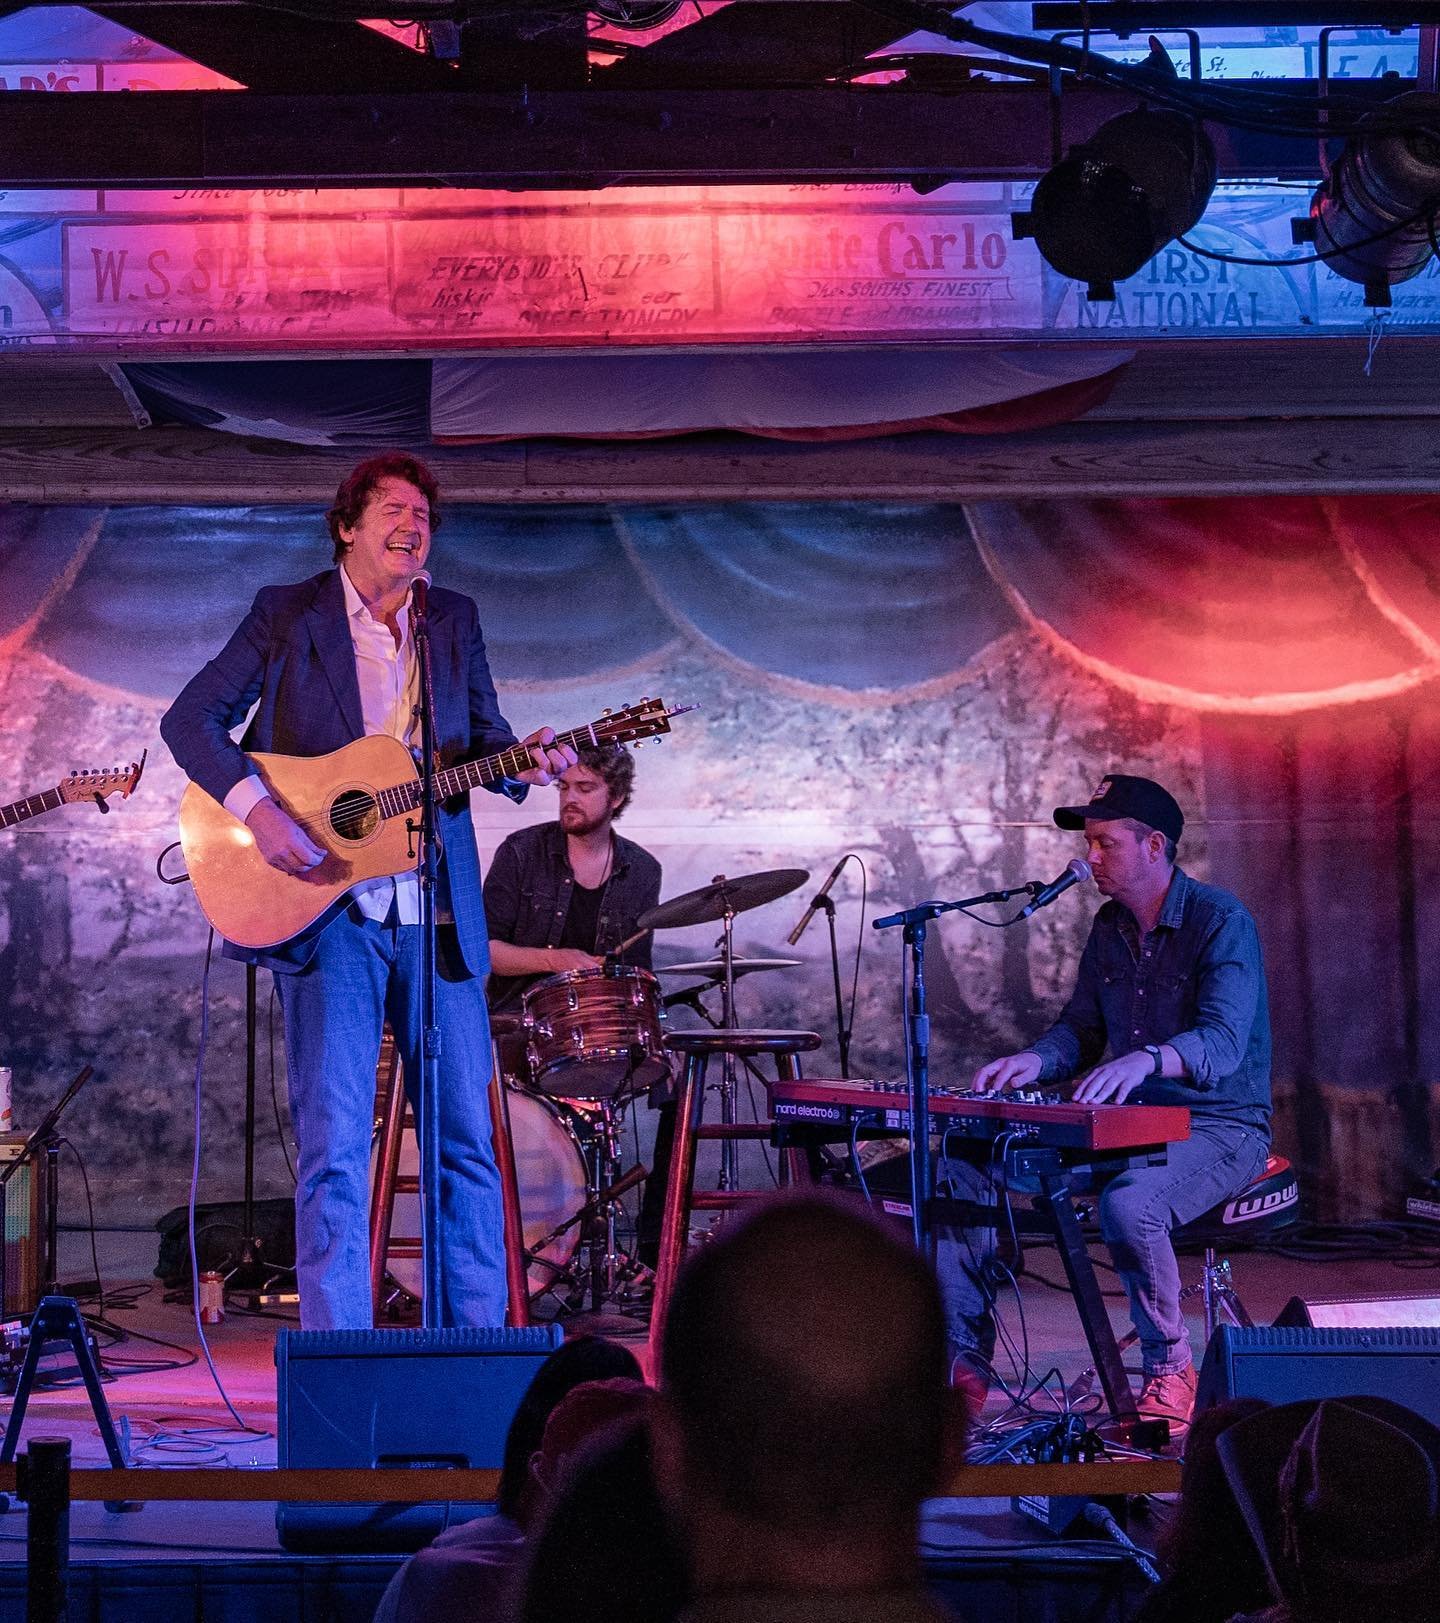 Some great shots from last night&rsquo;s show at @gruenehall of The Next Waltz Barnstorming package of @brucerobison &amp; @fullbright.john with special guest @summerdean !

Our last stop is tonight in San Angelo with special guest @georgiaparkermusi